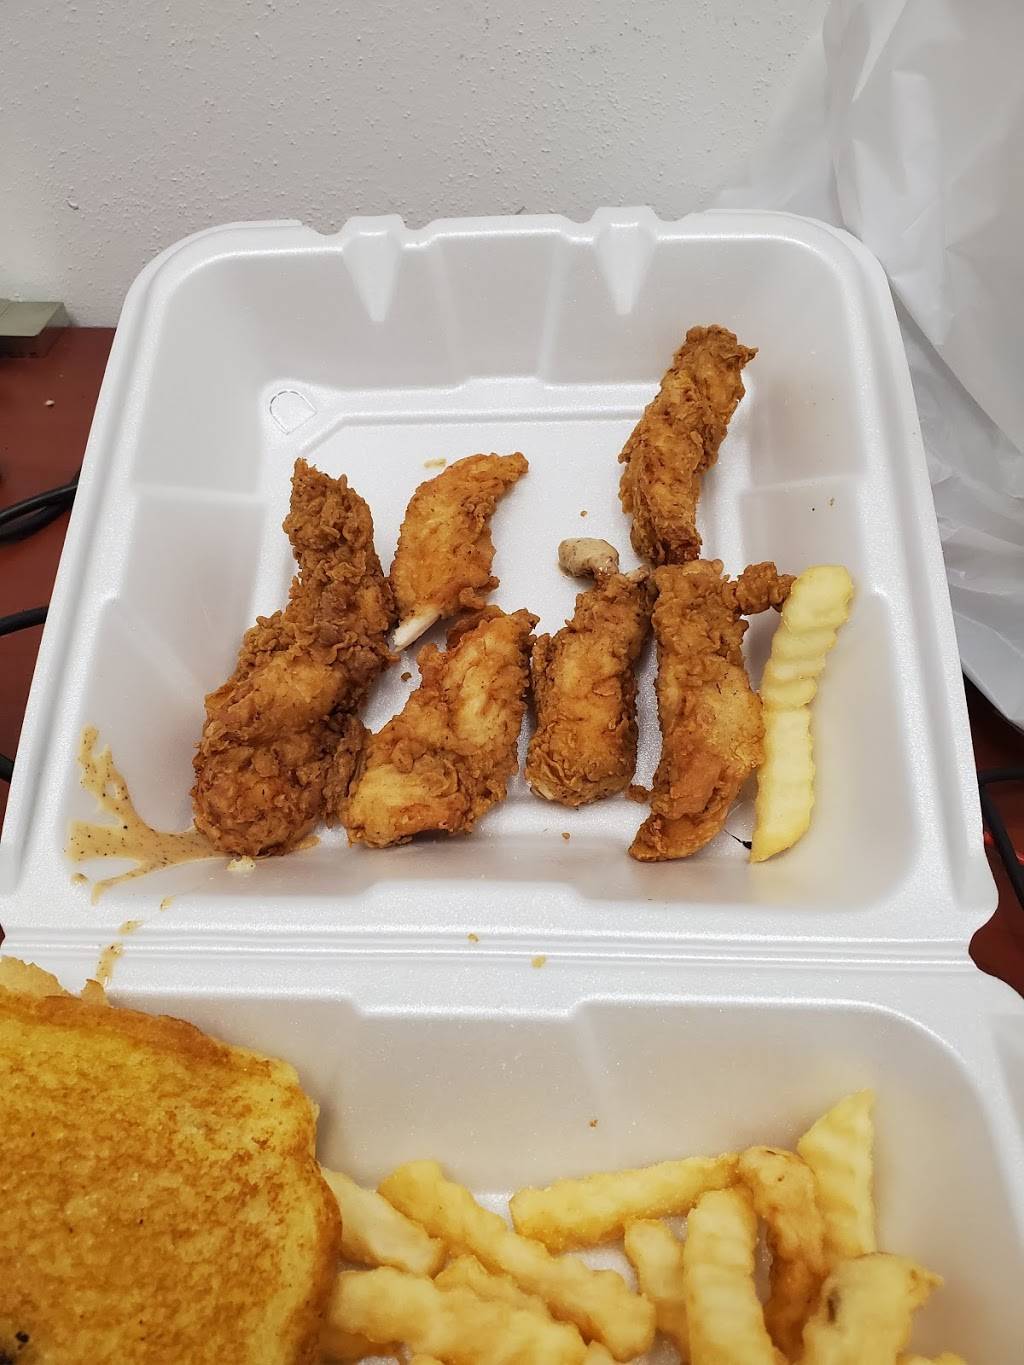 Laynes Chicken Fingers | 102 Central Expy S, Allen, TX 75013, USA | Phone: (972) 908-0594